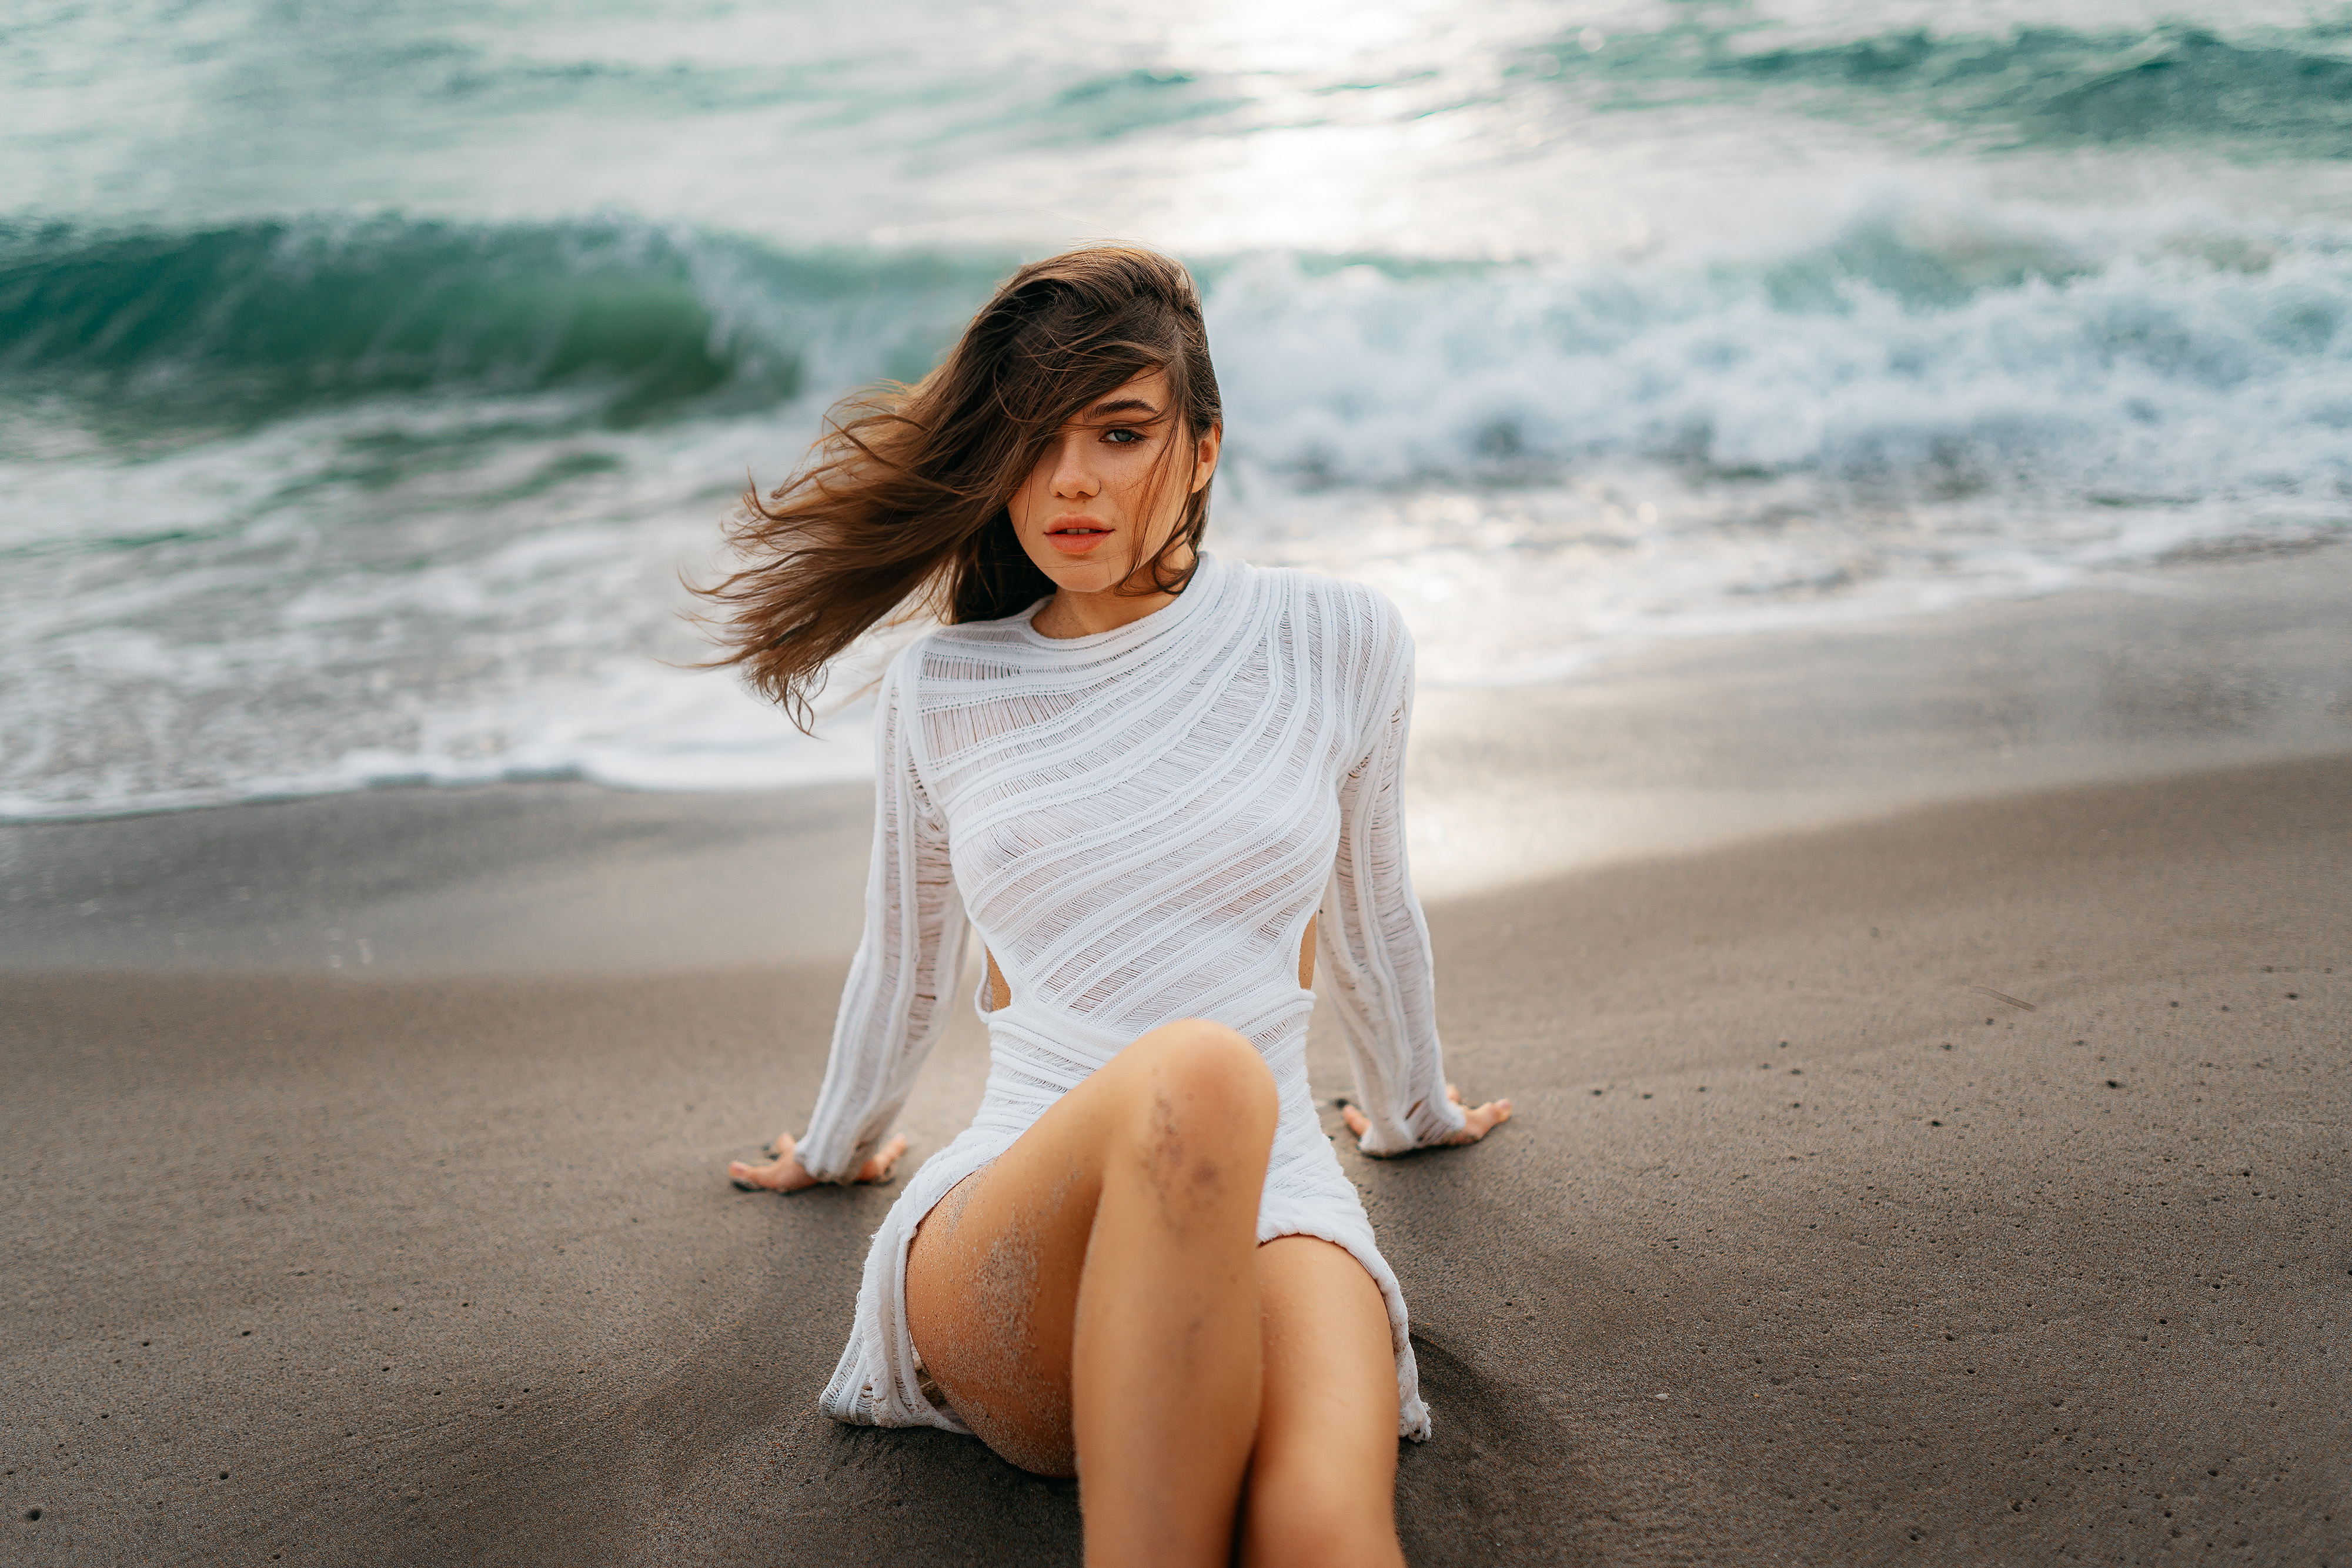 horizontal, outdoors, photography, beach, sea, one person, vacations, lifestyles, young women, leisure activity, beautiful woman, sand, beauty, day, standing, white, blue, ocean, atlantic, summer, beach, sand, face, portrait, eyes, skin, legs, hair, windy, Mykola Novikov